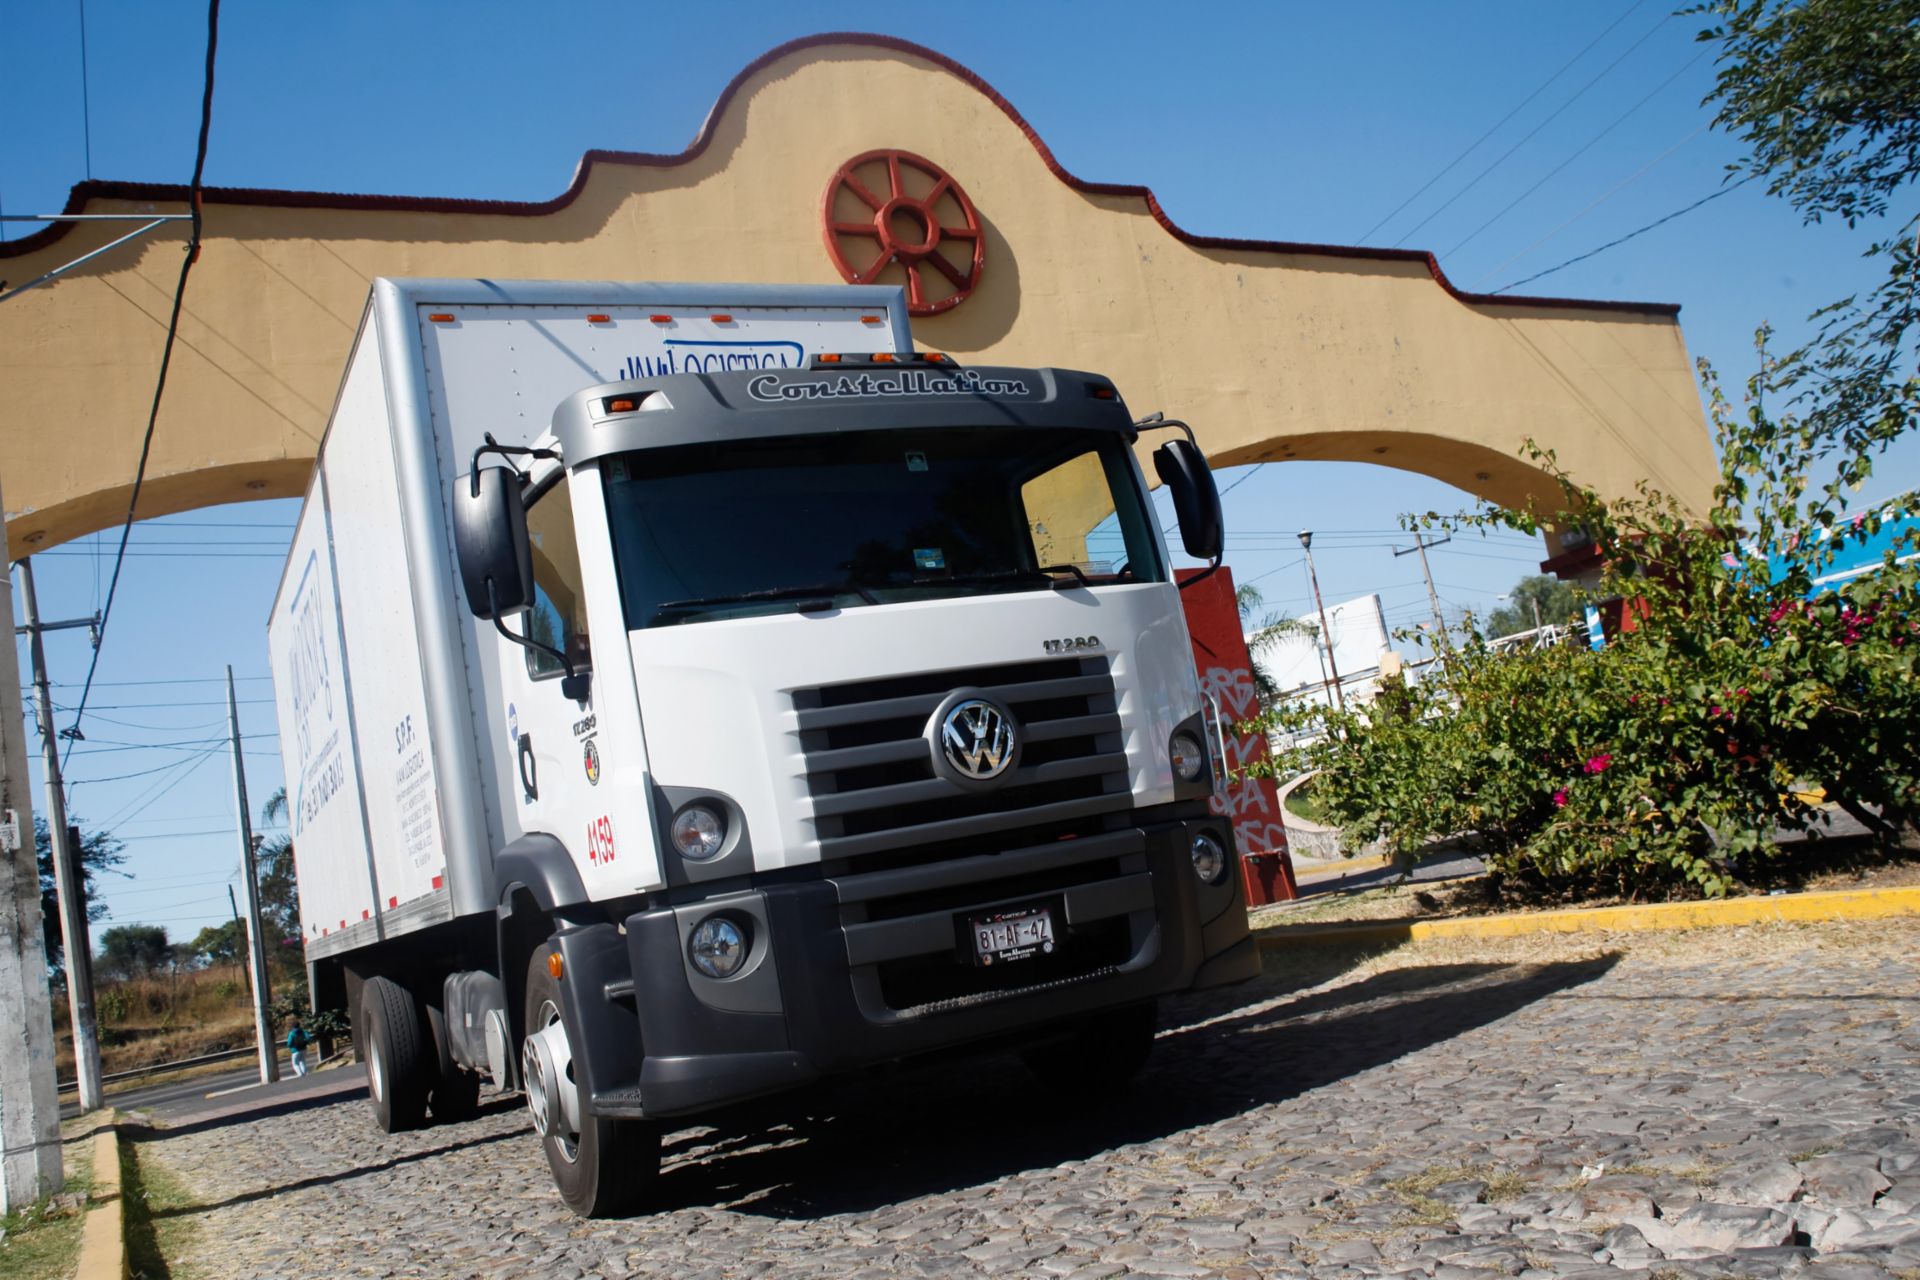 VW trucks run in more than 30 countries. In the picture, a VW Constellation is operating in Mexico.
                 